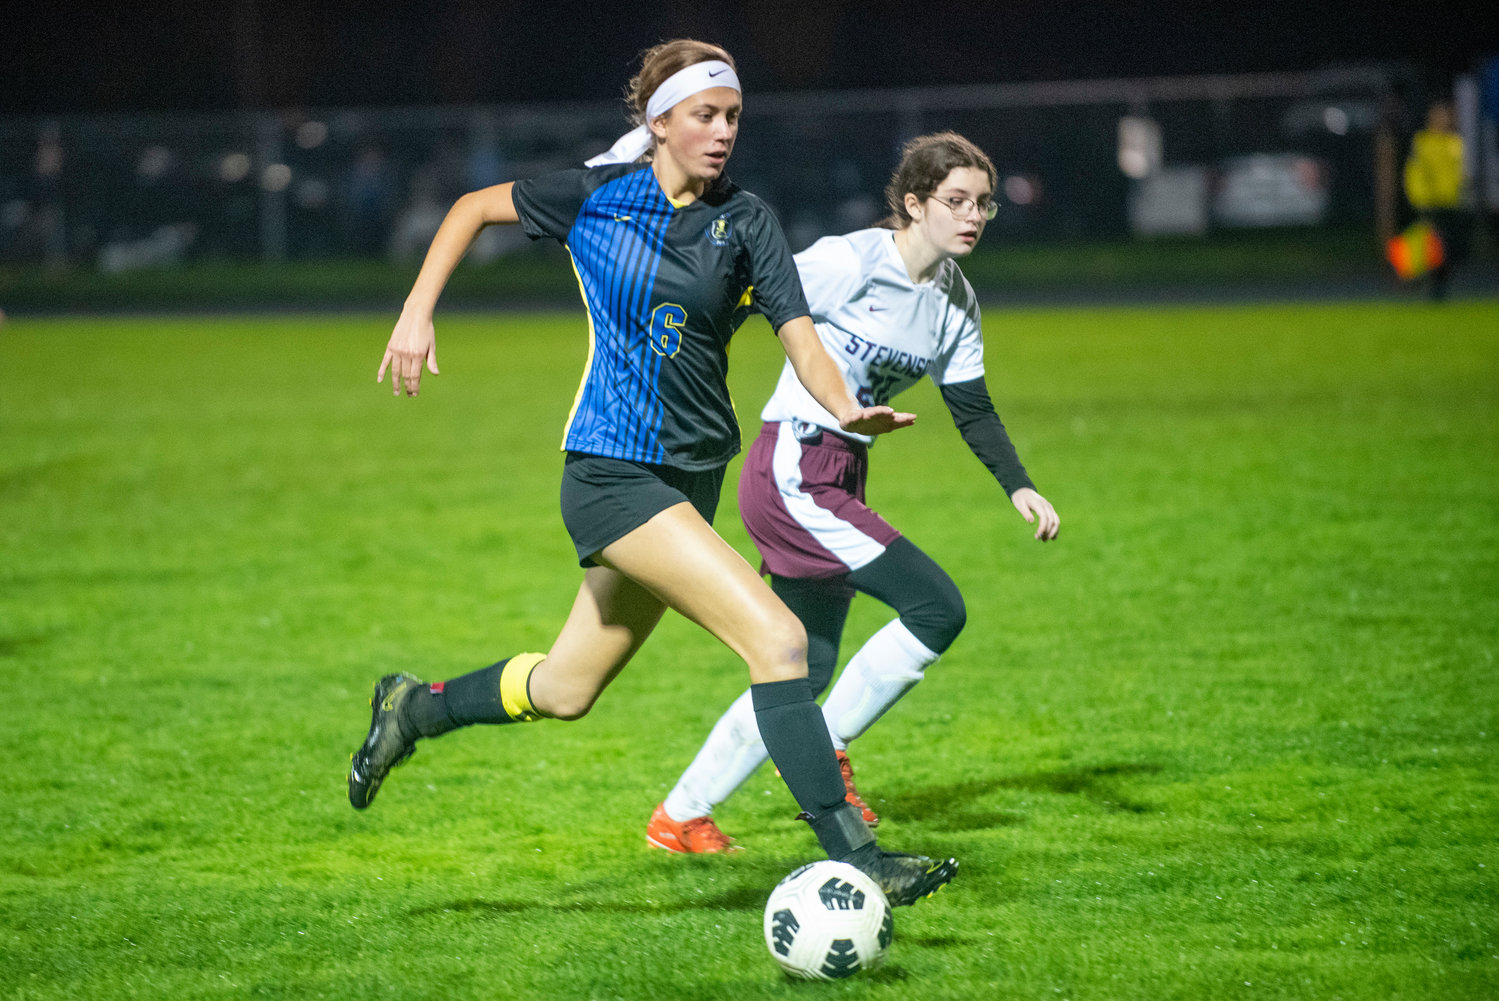 Adna senior Madi Stark drives downfield against Stevenson in the opening round of the district playoffs at home Monday, Nov. 1.